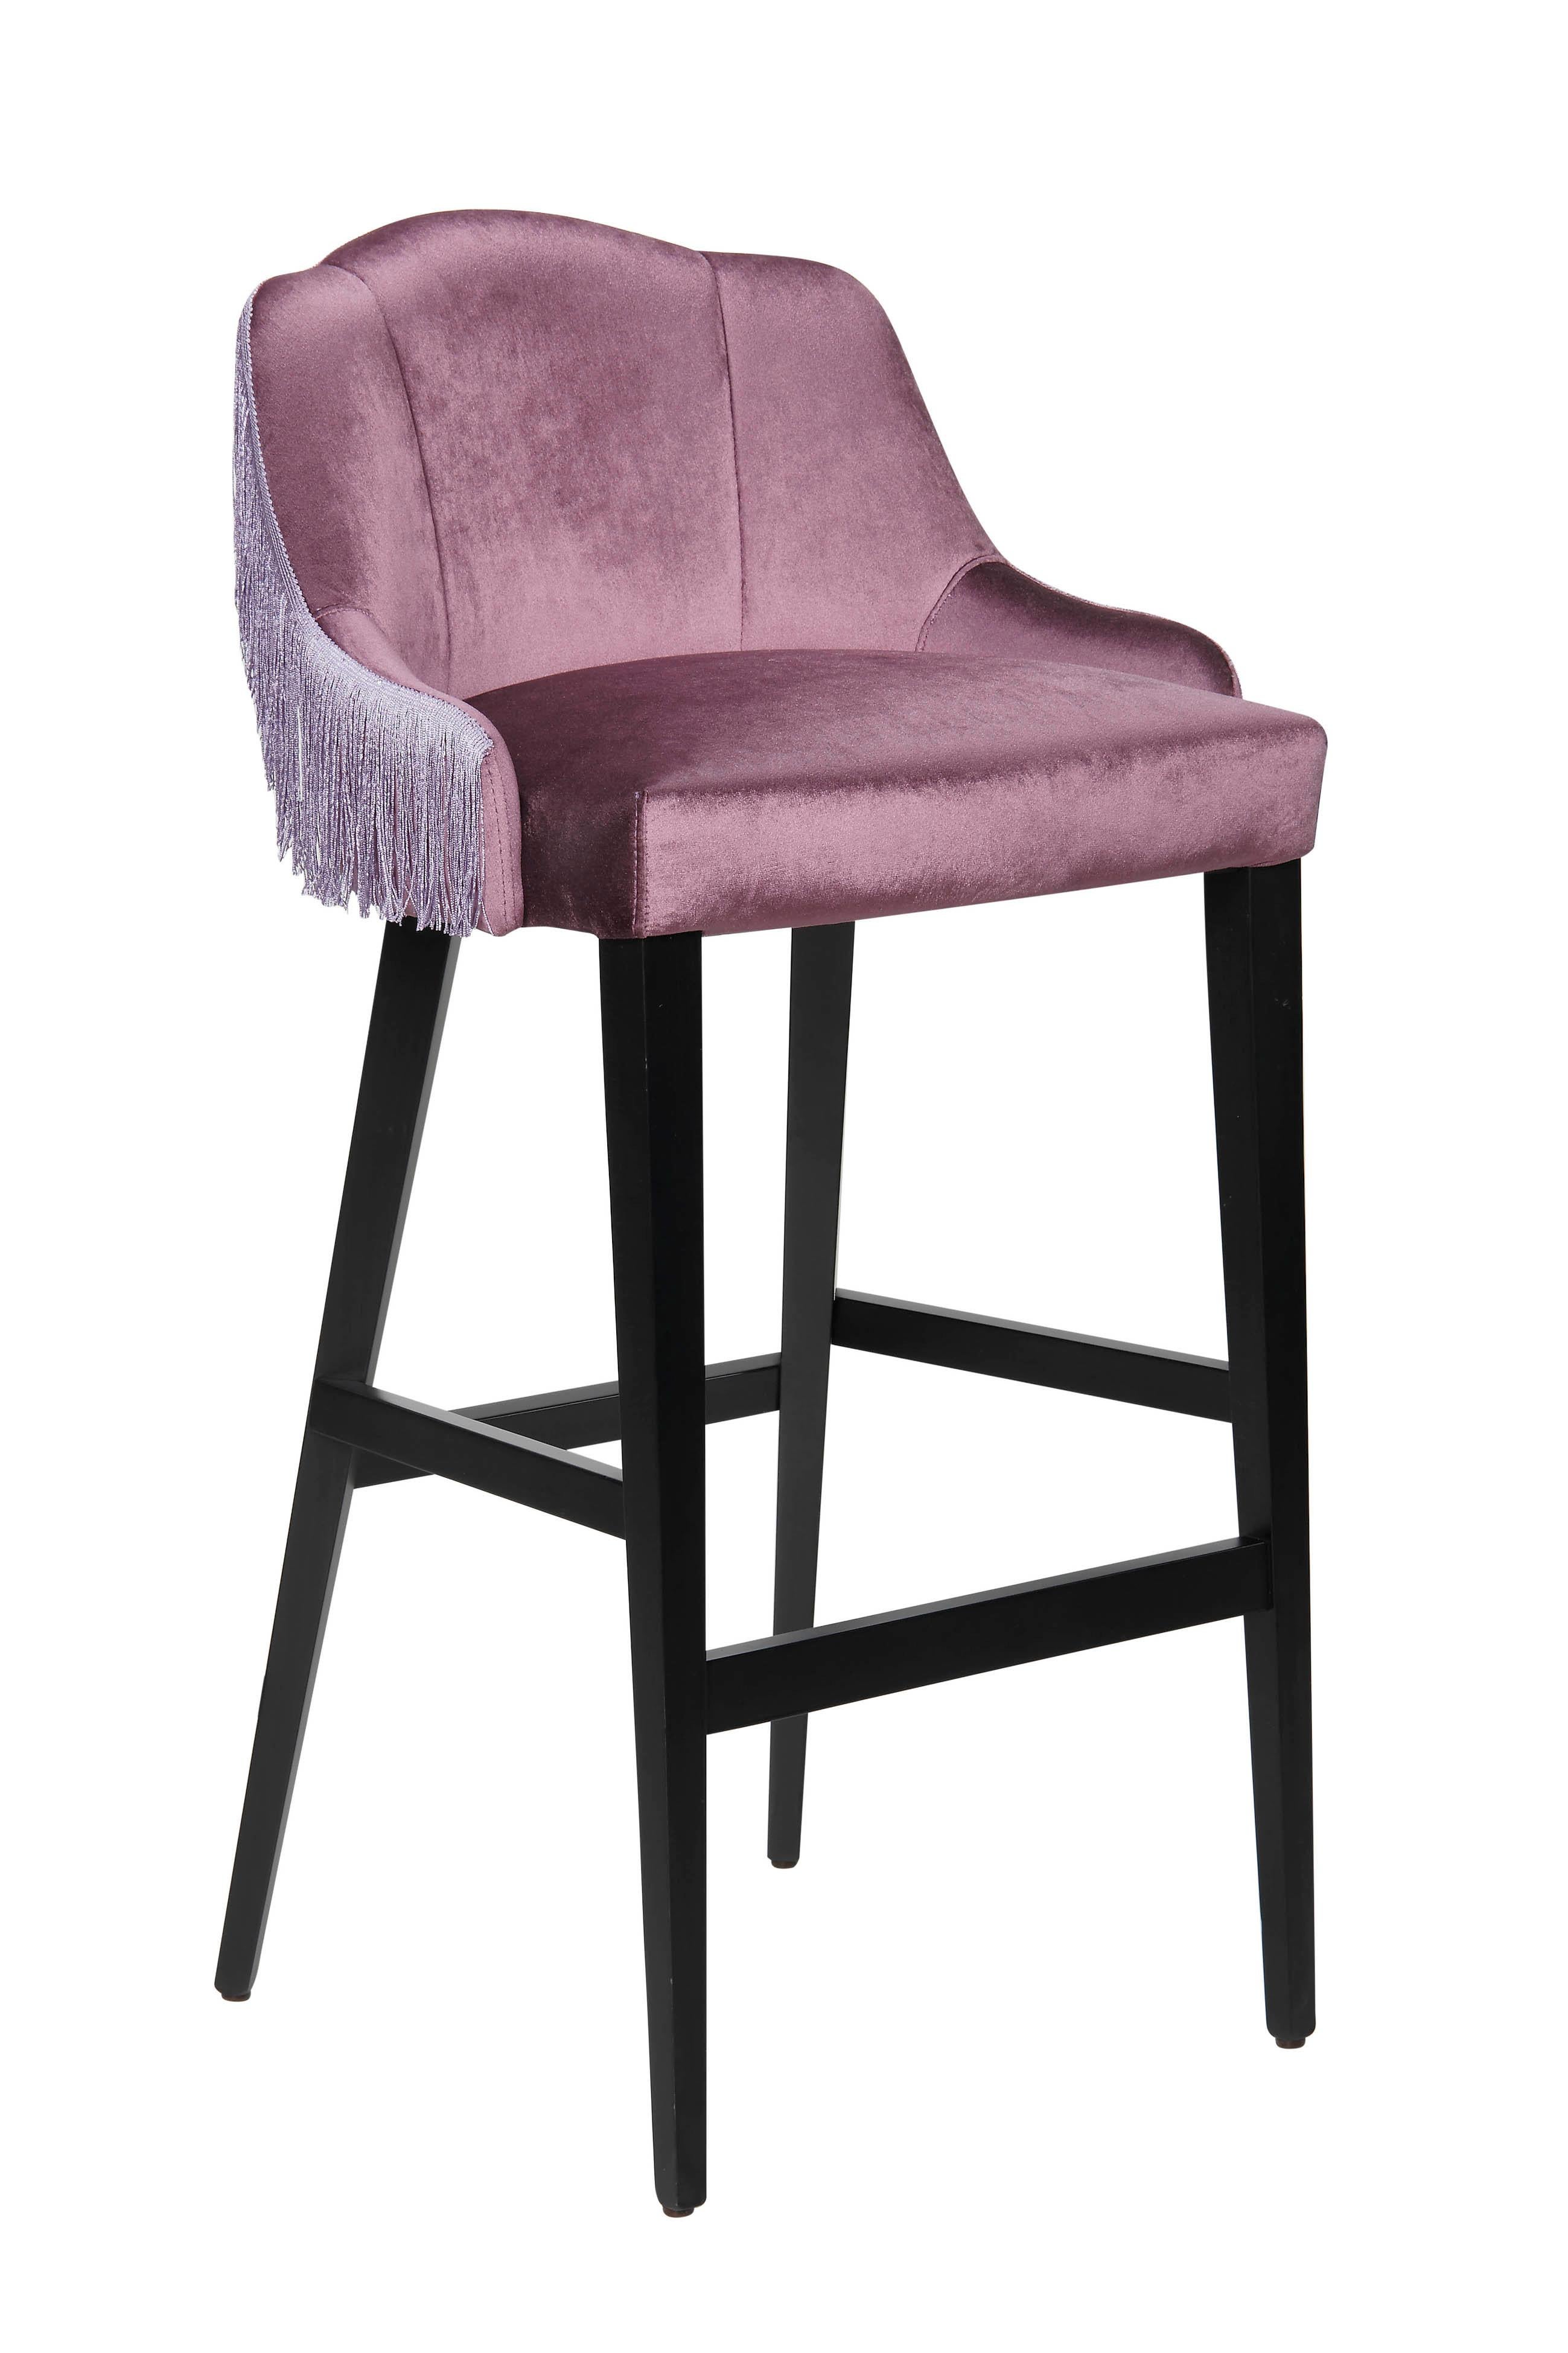 Fully upholstered seat and back with fringed back detail. Designed and produced by specialist contract furniture manufacturer in Italy specialized in producing chairs and furniture for the contract market. Combining delicate fringing, velvet fabrics